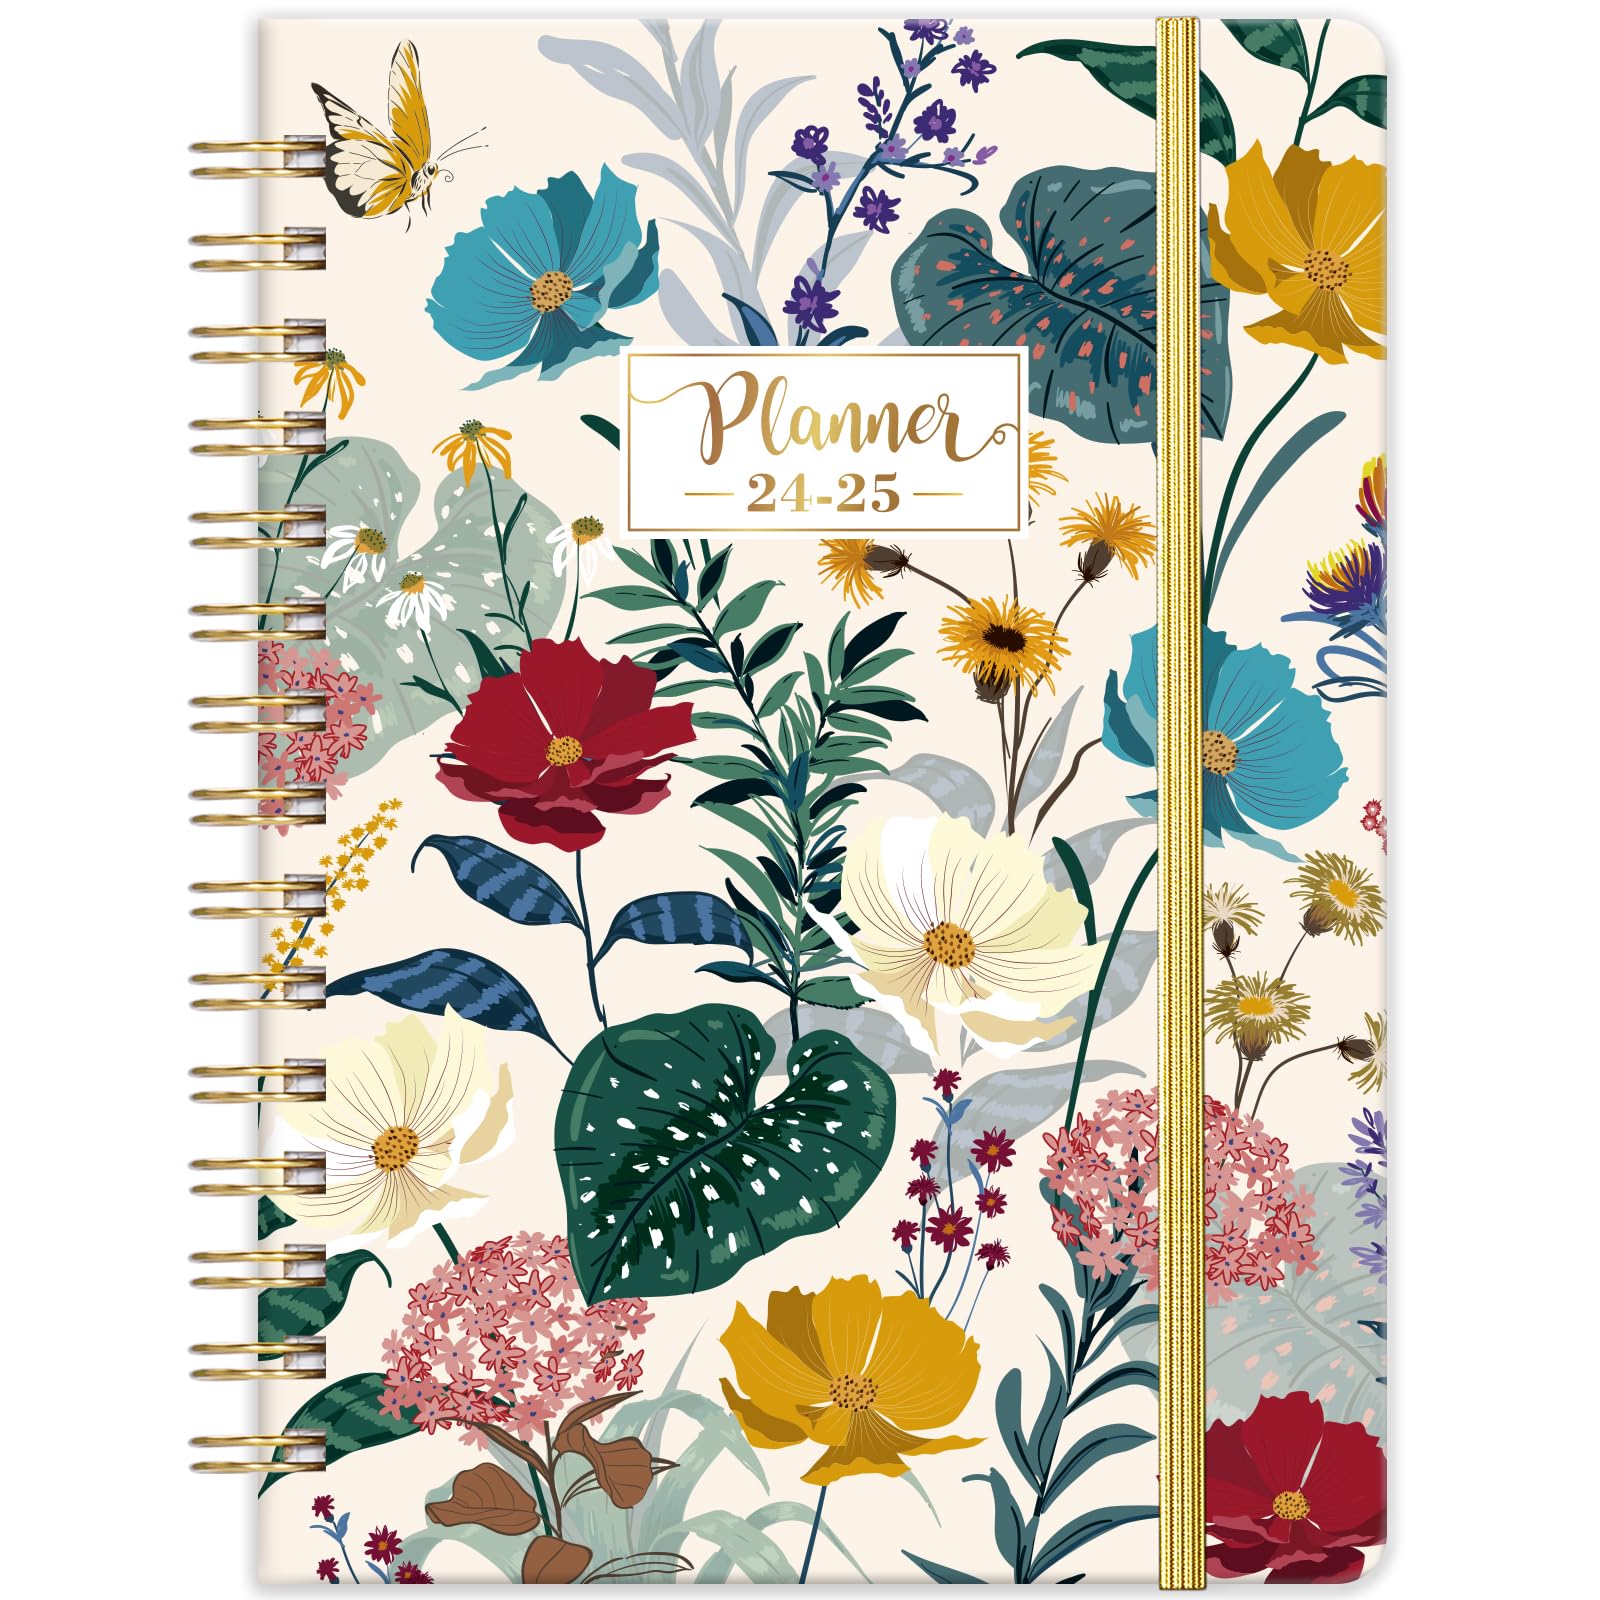 2024-2025 Planner - JUL 2024 - JUN 2025, Academic Planner 2024-2025, 6.4" x 8.5", 2024-2025 Planner Weekly Monthly, Hardcover, Thick Paper